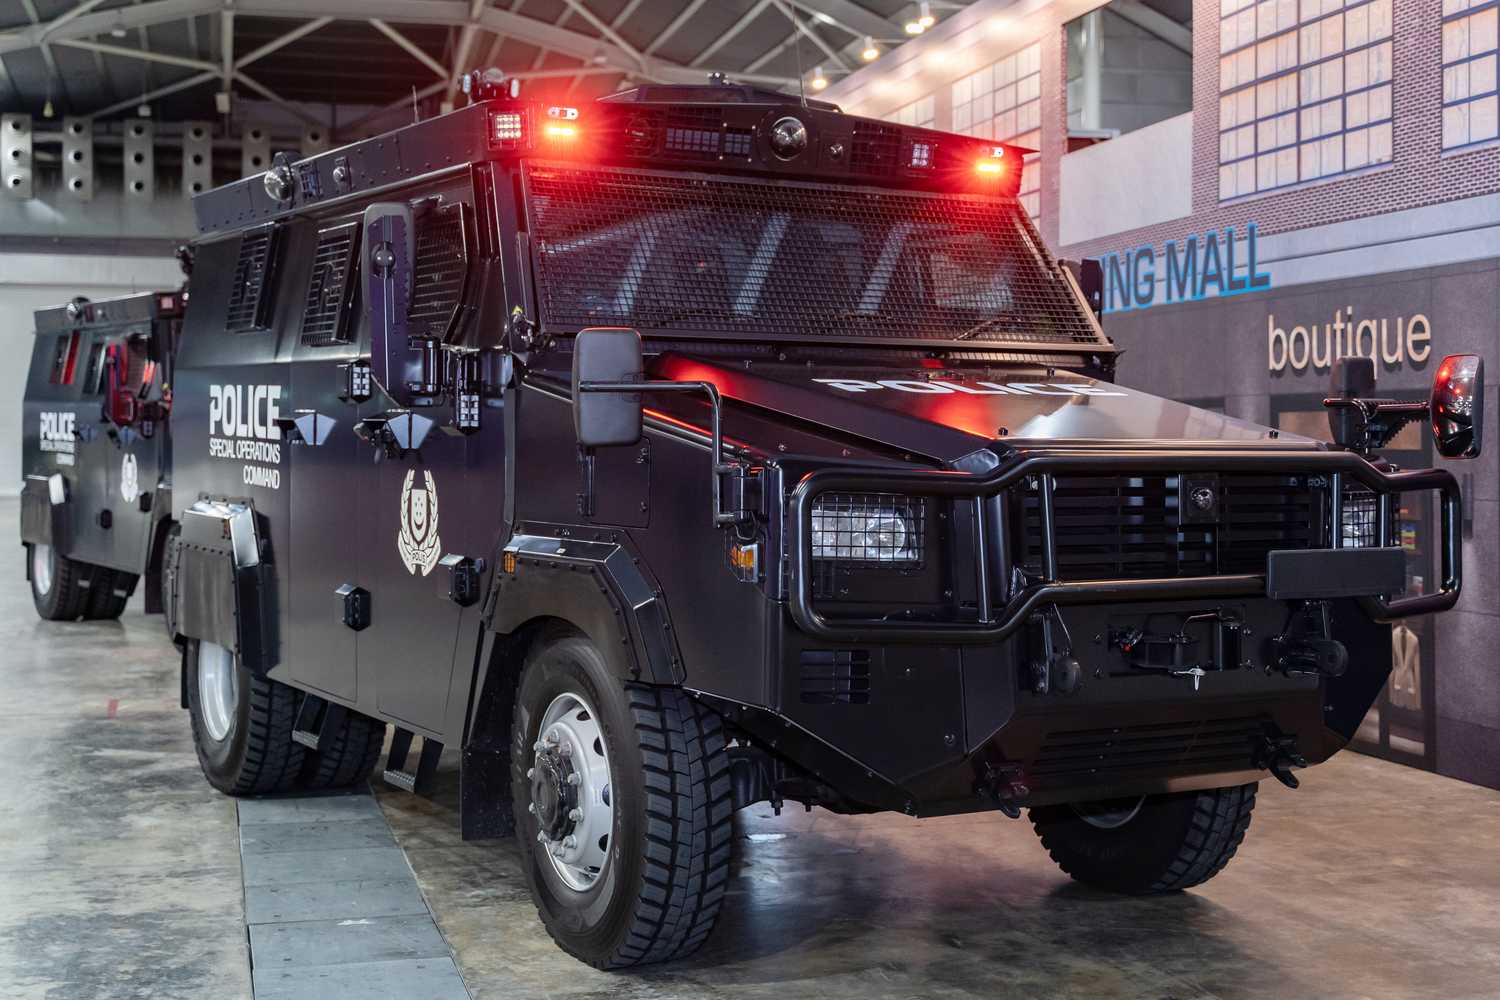 image of the police tactical strike vehicle. The vehicle is black in colour with the words "special operations command" written on the side of the vehicle in white. 